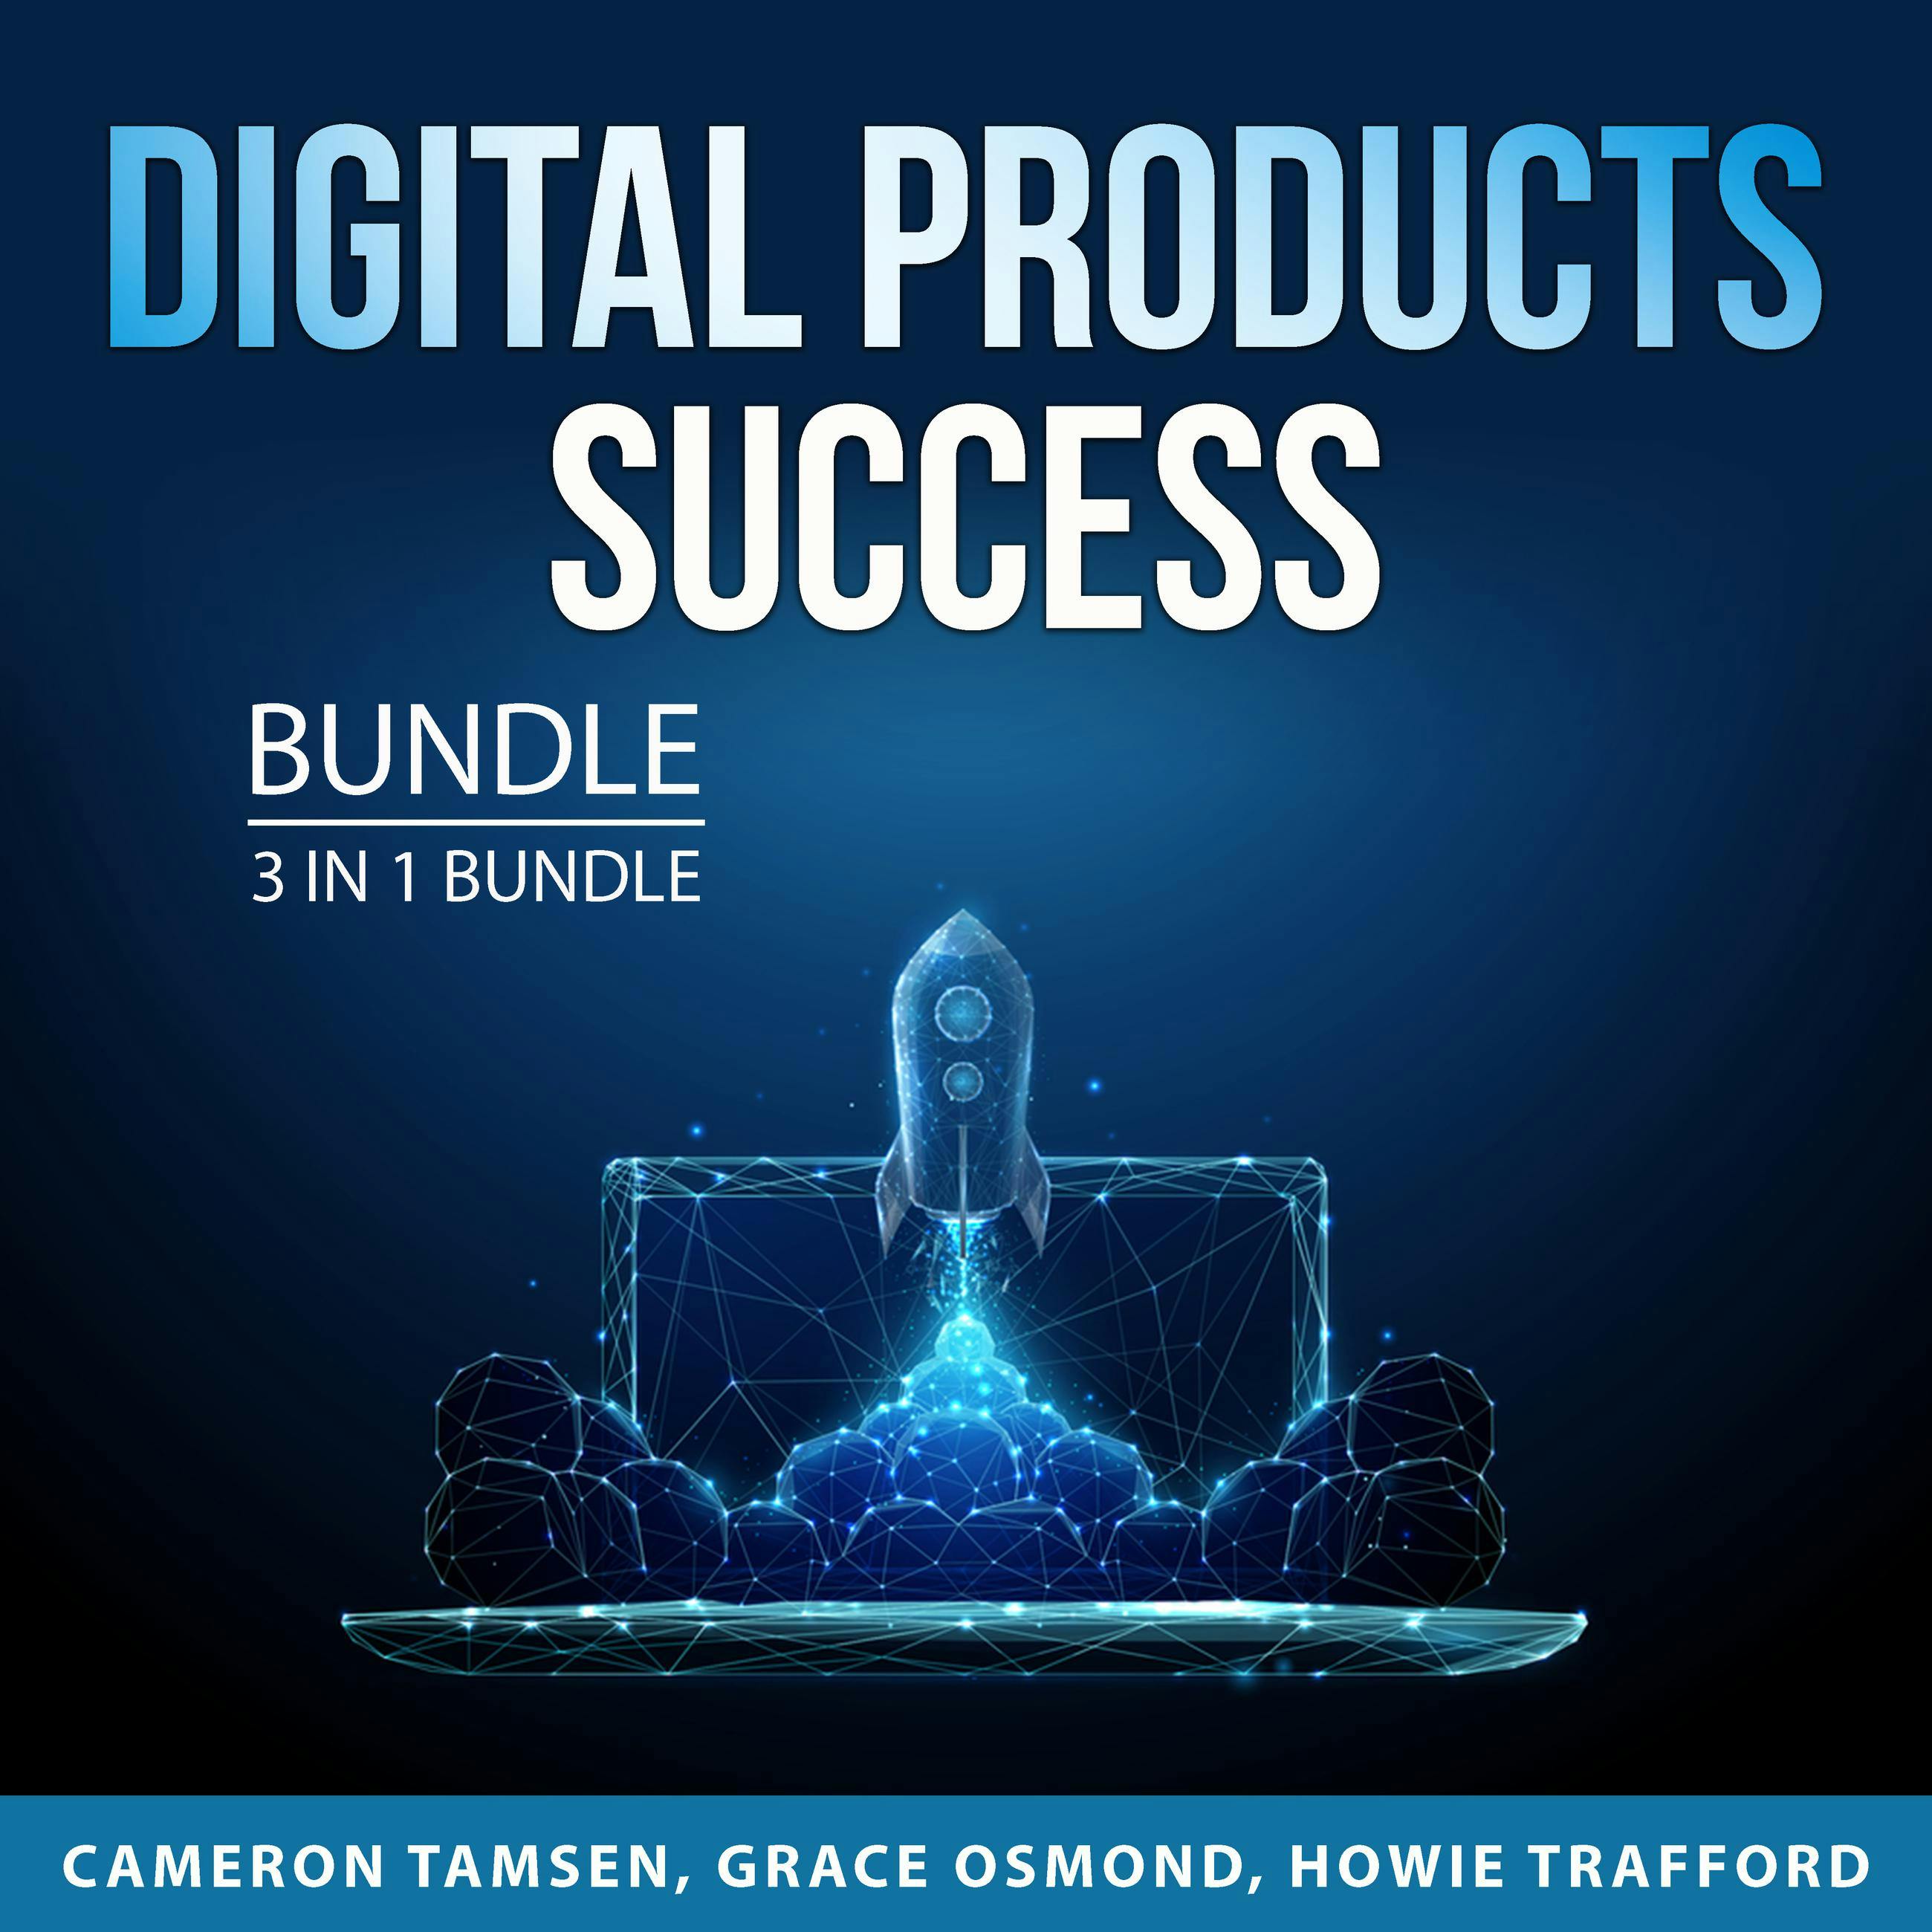 Digital Products Success Bundle, 3 in 1 Bundle: Digital Product Development, Digital Product Success, and How to Create a Bestseller - Howie Trafford, Cameron Tamsen, Grace Osmond